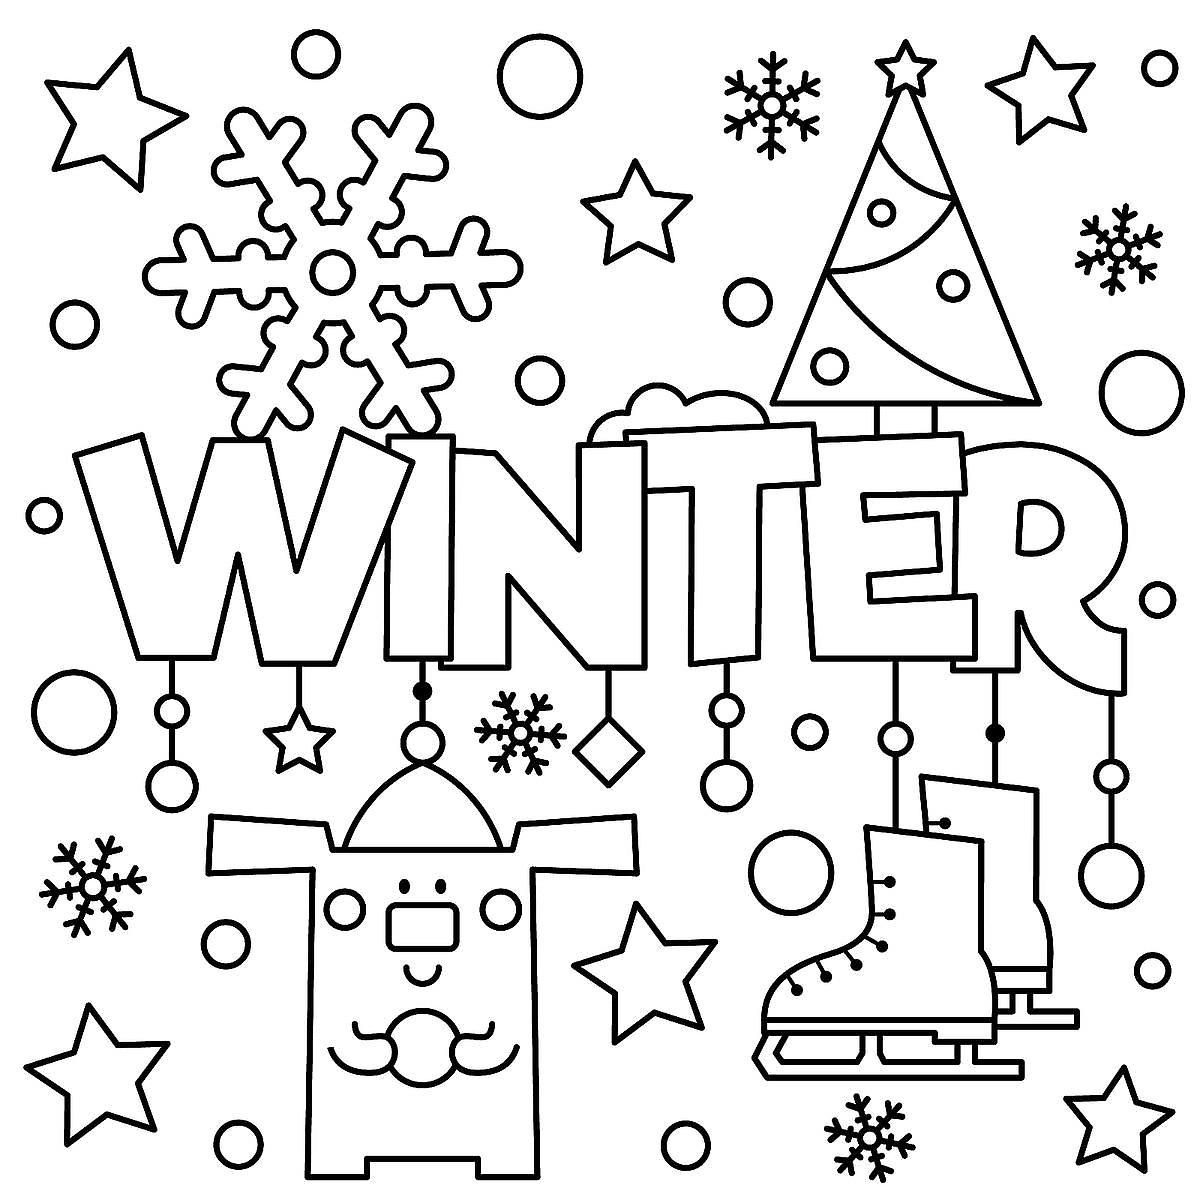 Winter Puzzle & Coloring Pages Printable Winter Themed Activity ...